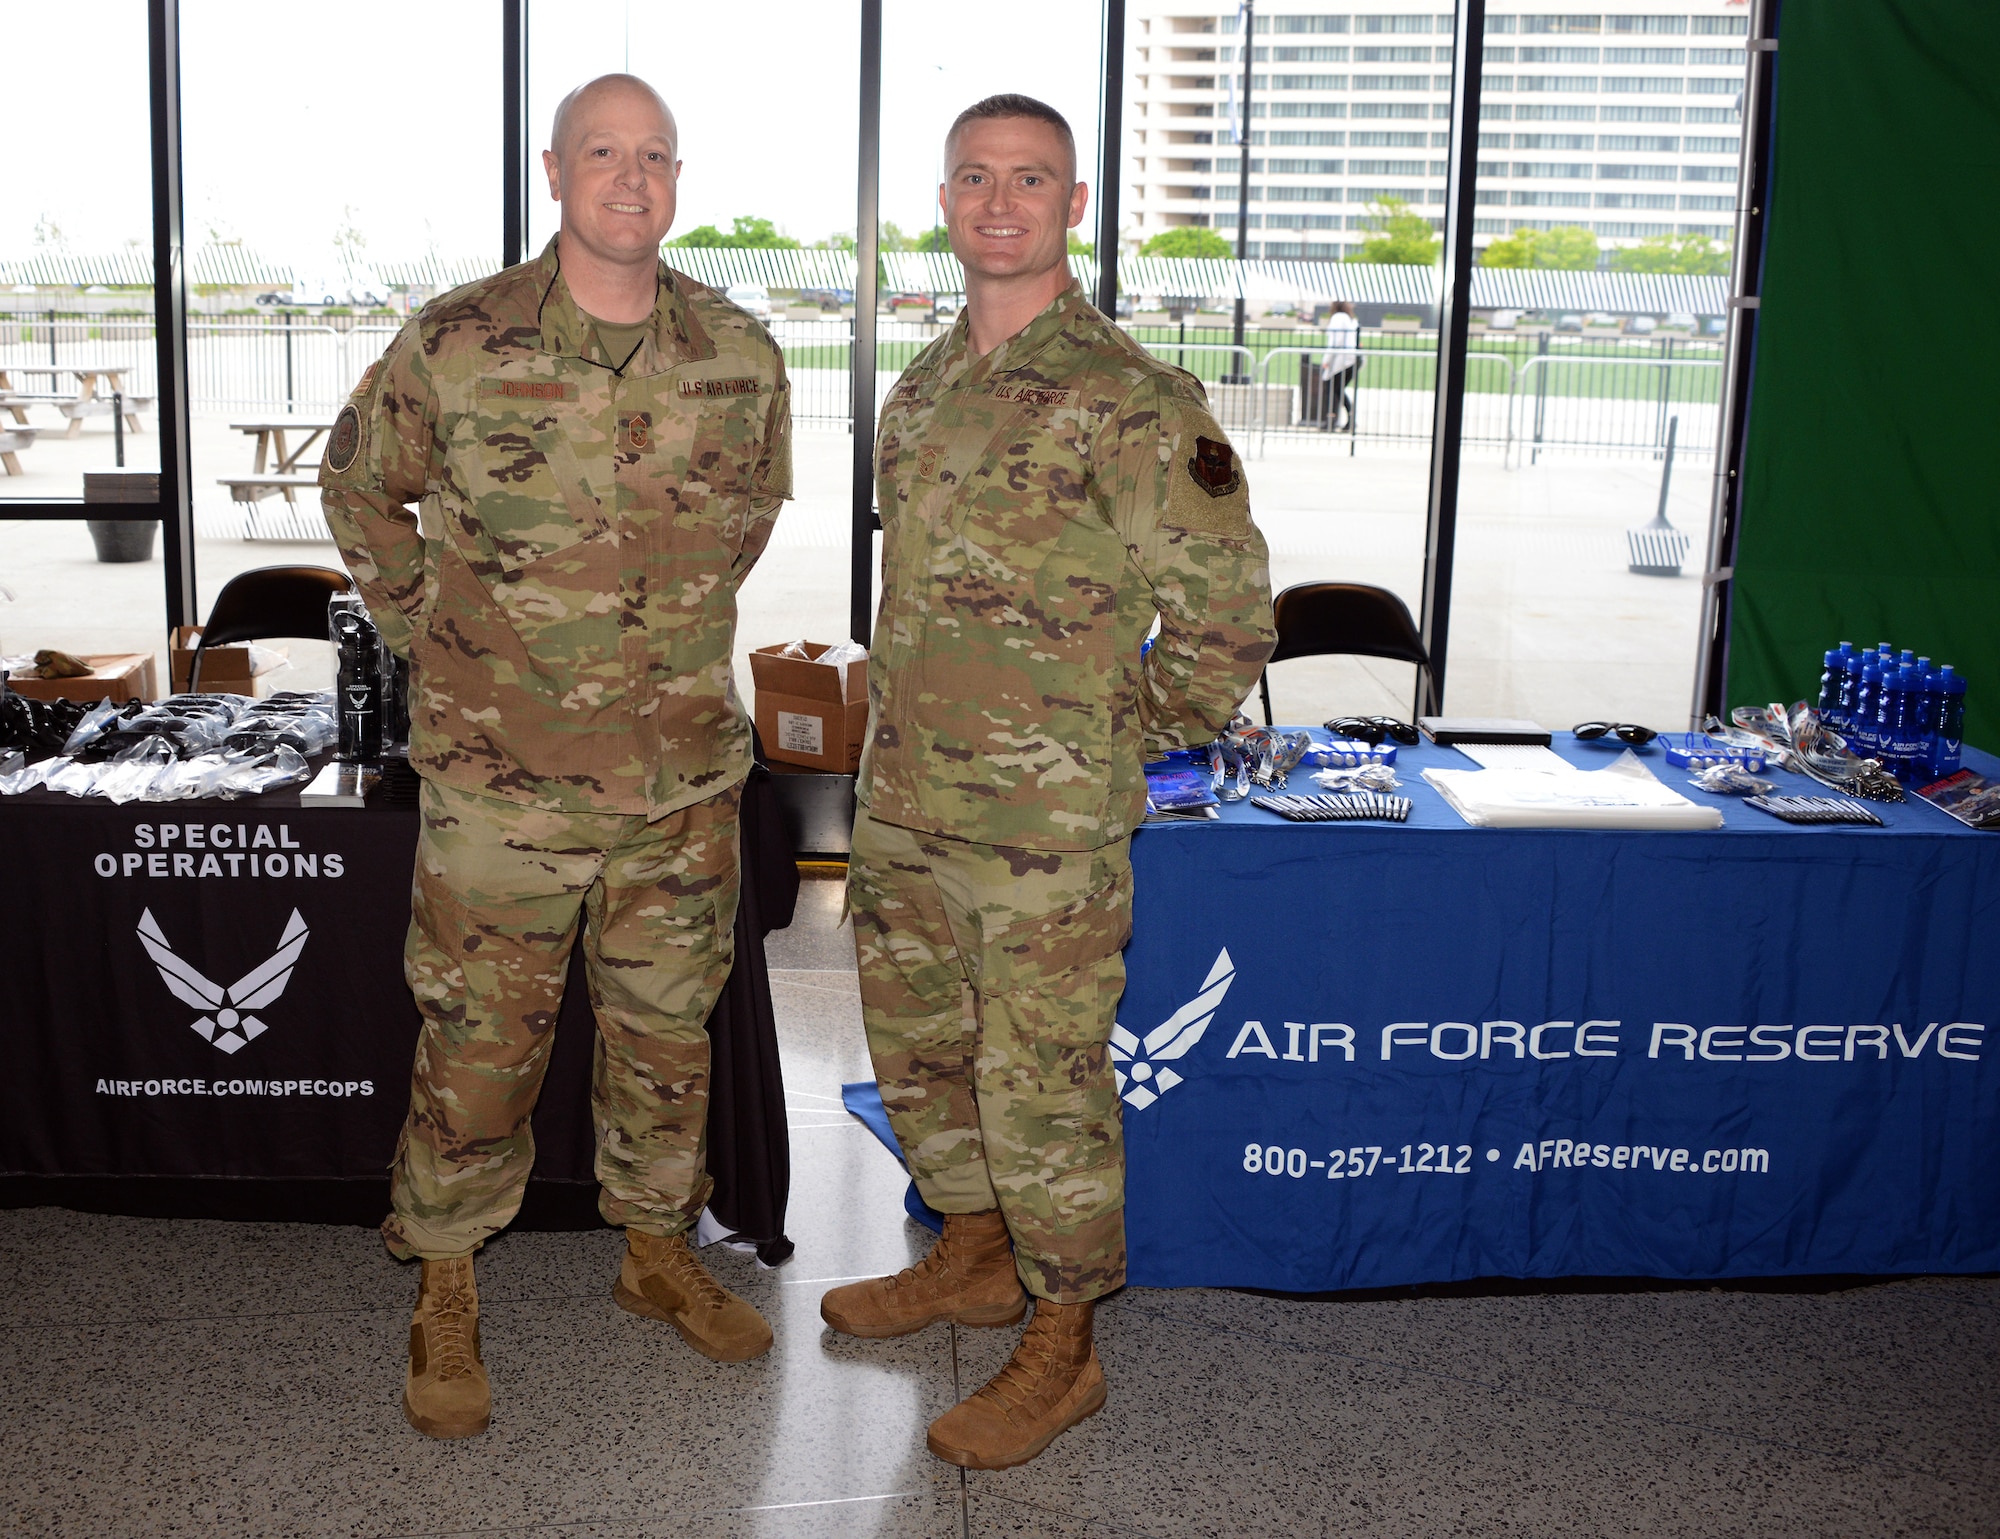 Chief Master Sgt. Michael Johnson, currently the Air Force Recruiting Service chief of strategic marketing, and now-retired Senior Master Sgt. Michael Lear, get set up for the Professional Fighters League event prior to the fights on May 9, 2019 at Nassau Coliseum, Long Island, New York.